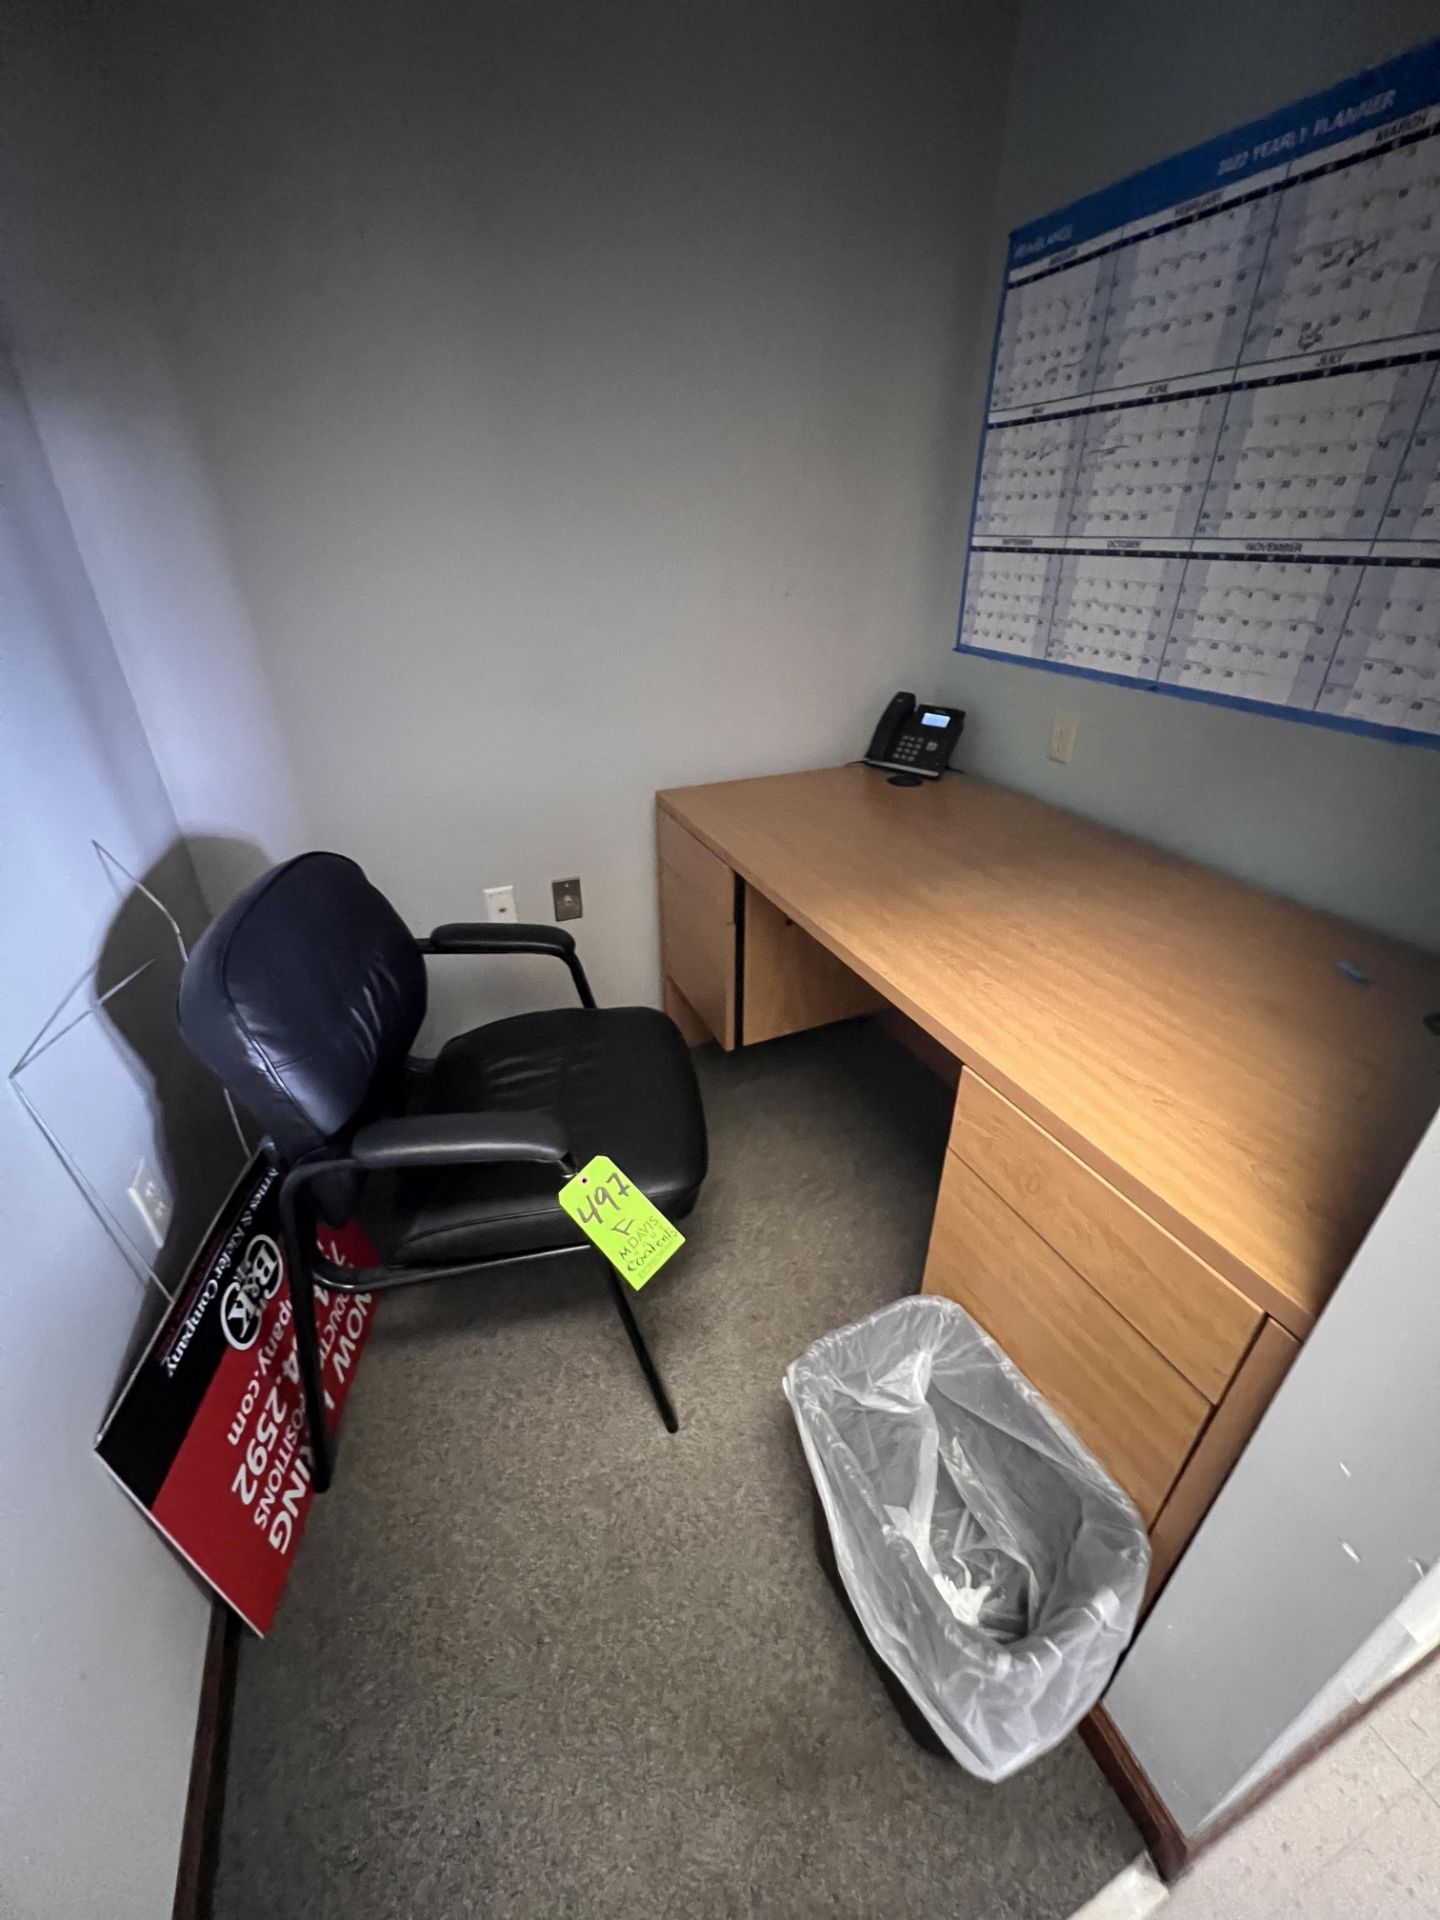 CONTENTS OF OFFICE, INCLUDES DESK AND CHAIR, DOES NOT INCLUDE PHONE